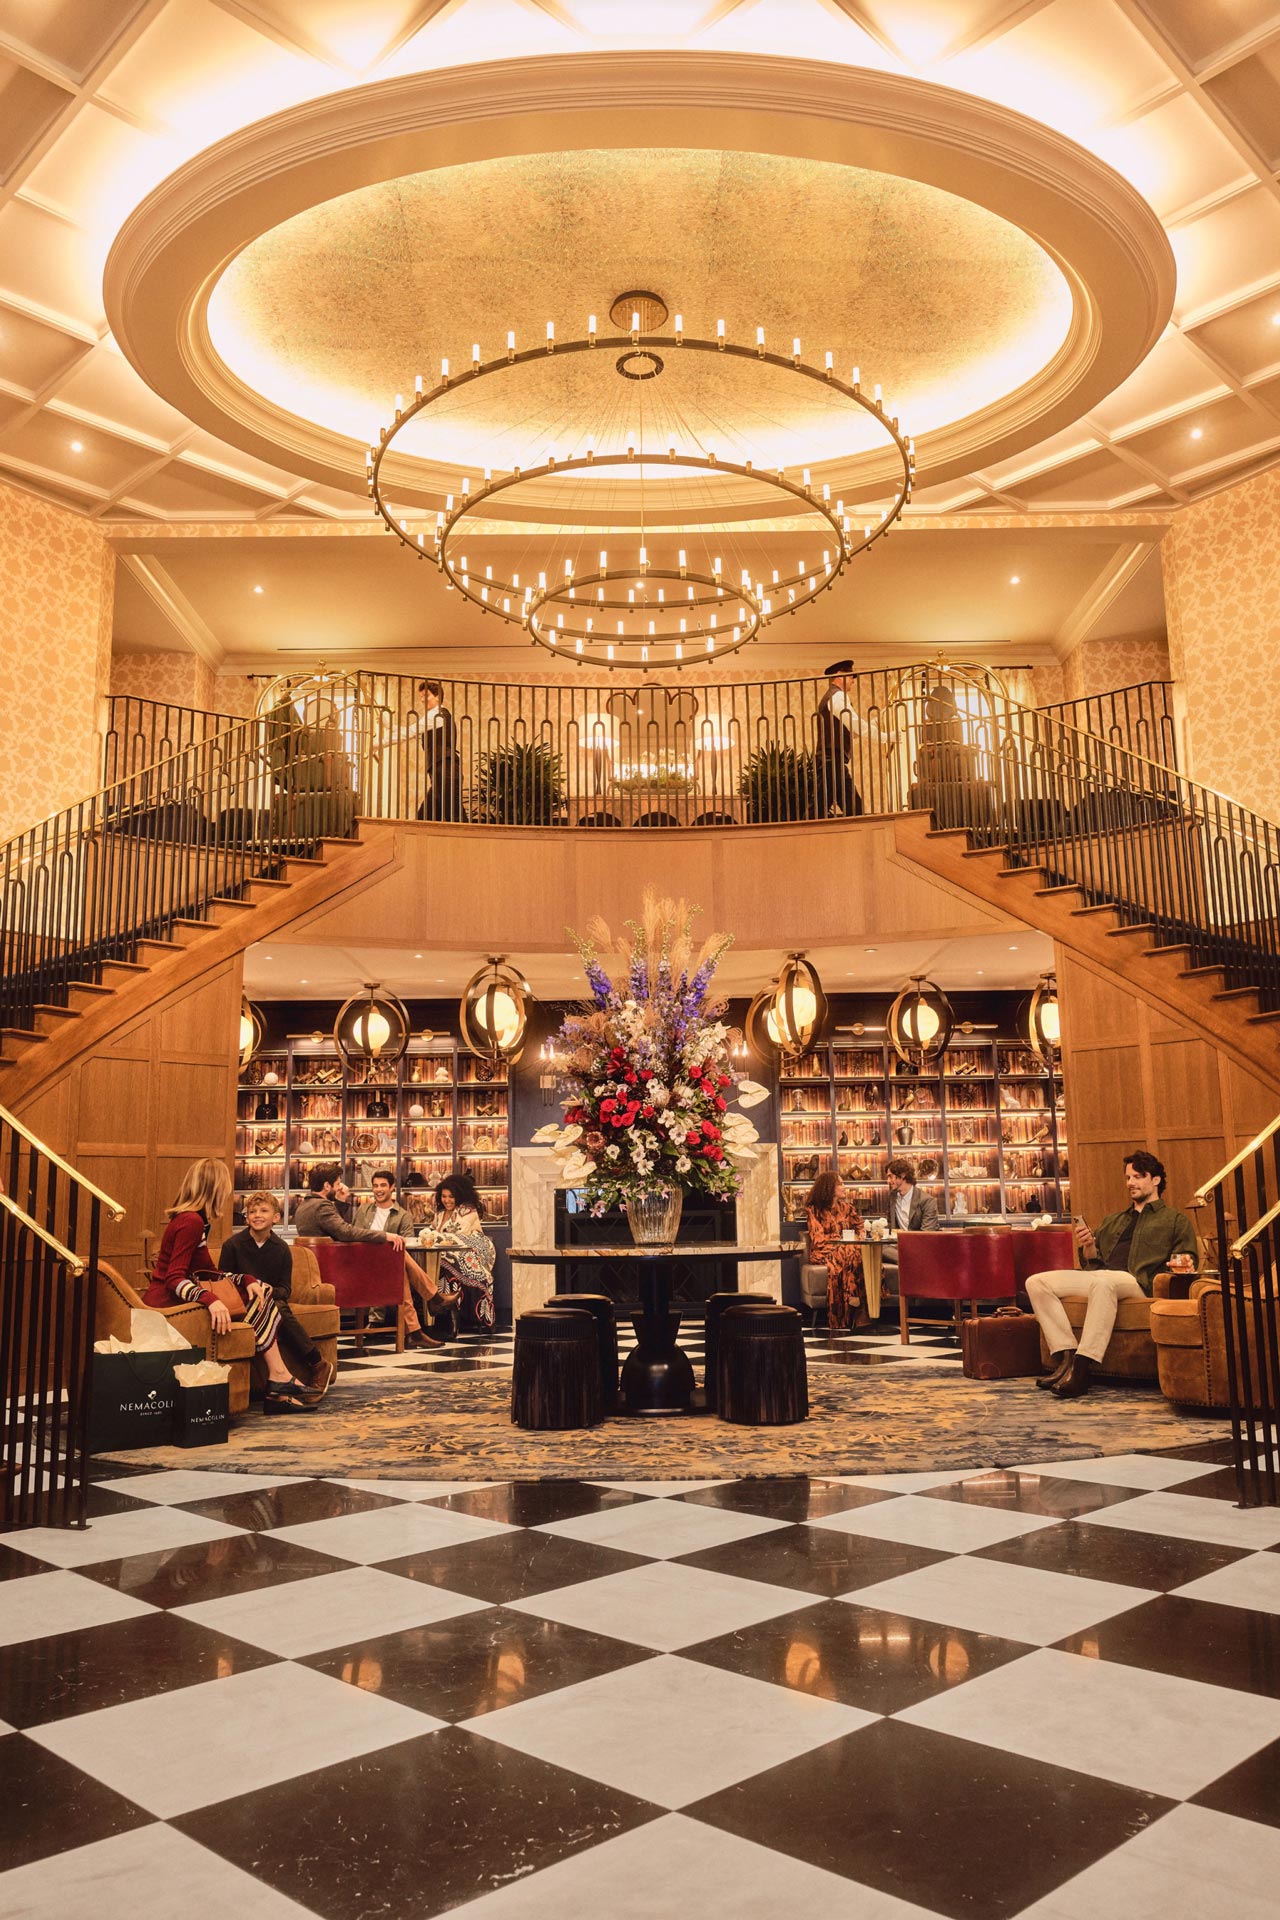 Click here to open the gallery overlay for the image: the grand lodge lobby with black and white floor and very large chandelier with stair cases on either side